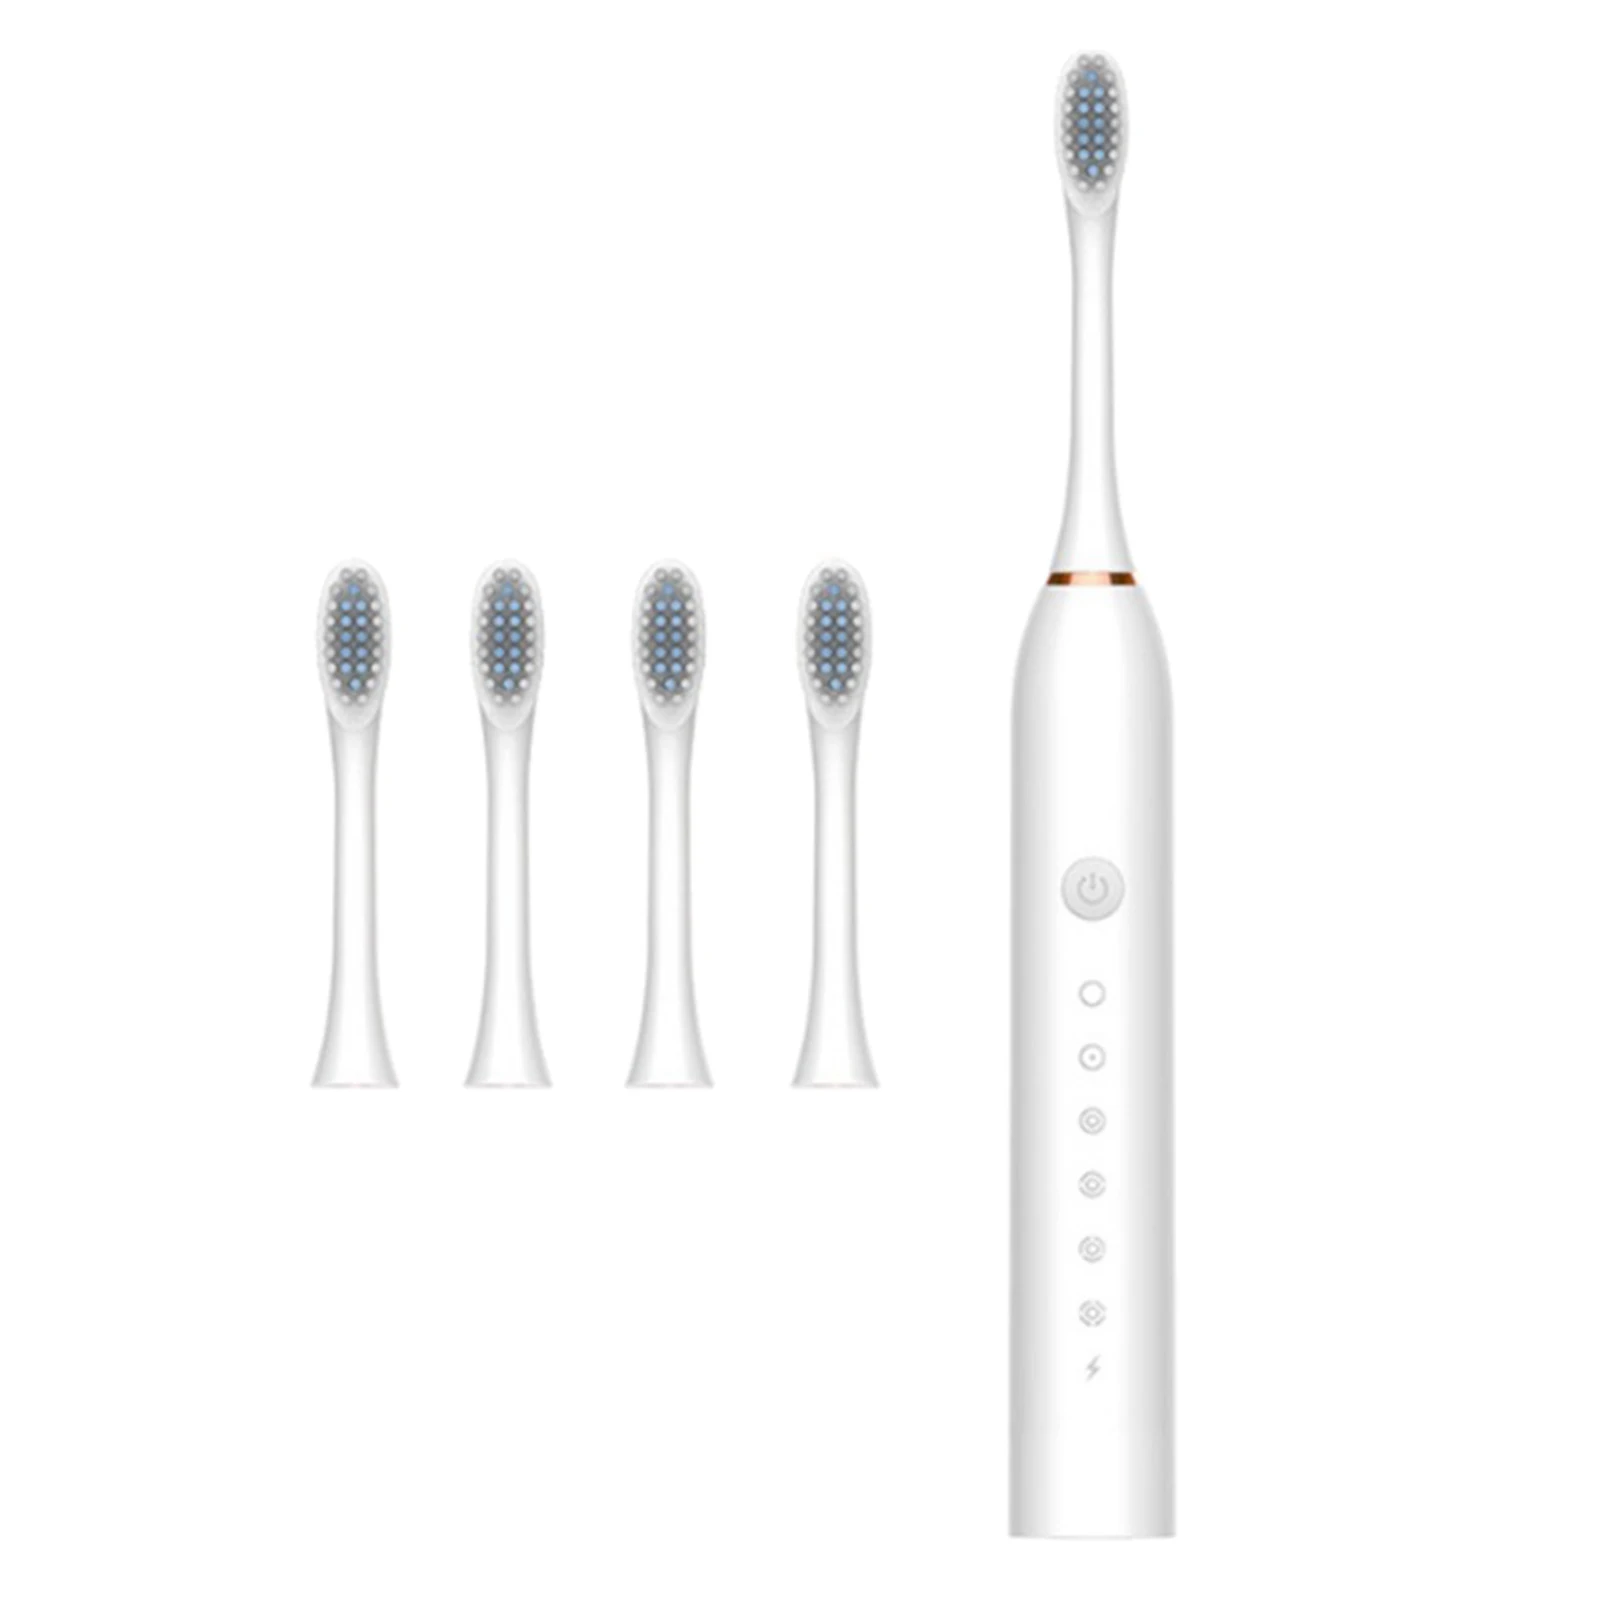 Kids Electric Toothbrush USB Rechargeable Adult Waterproof 6 Modes for Adult